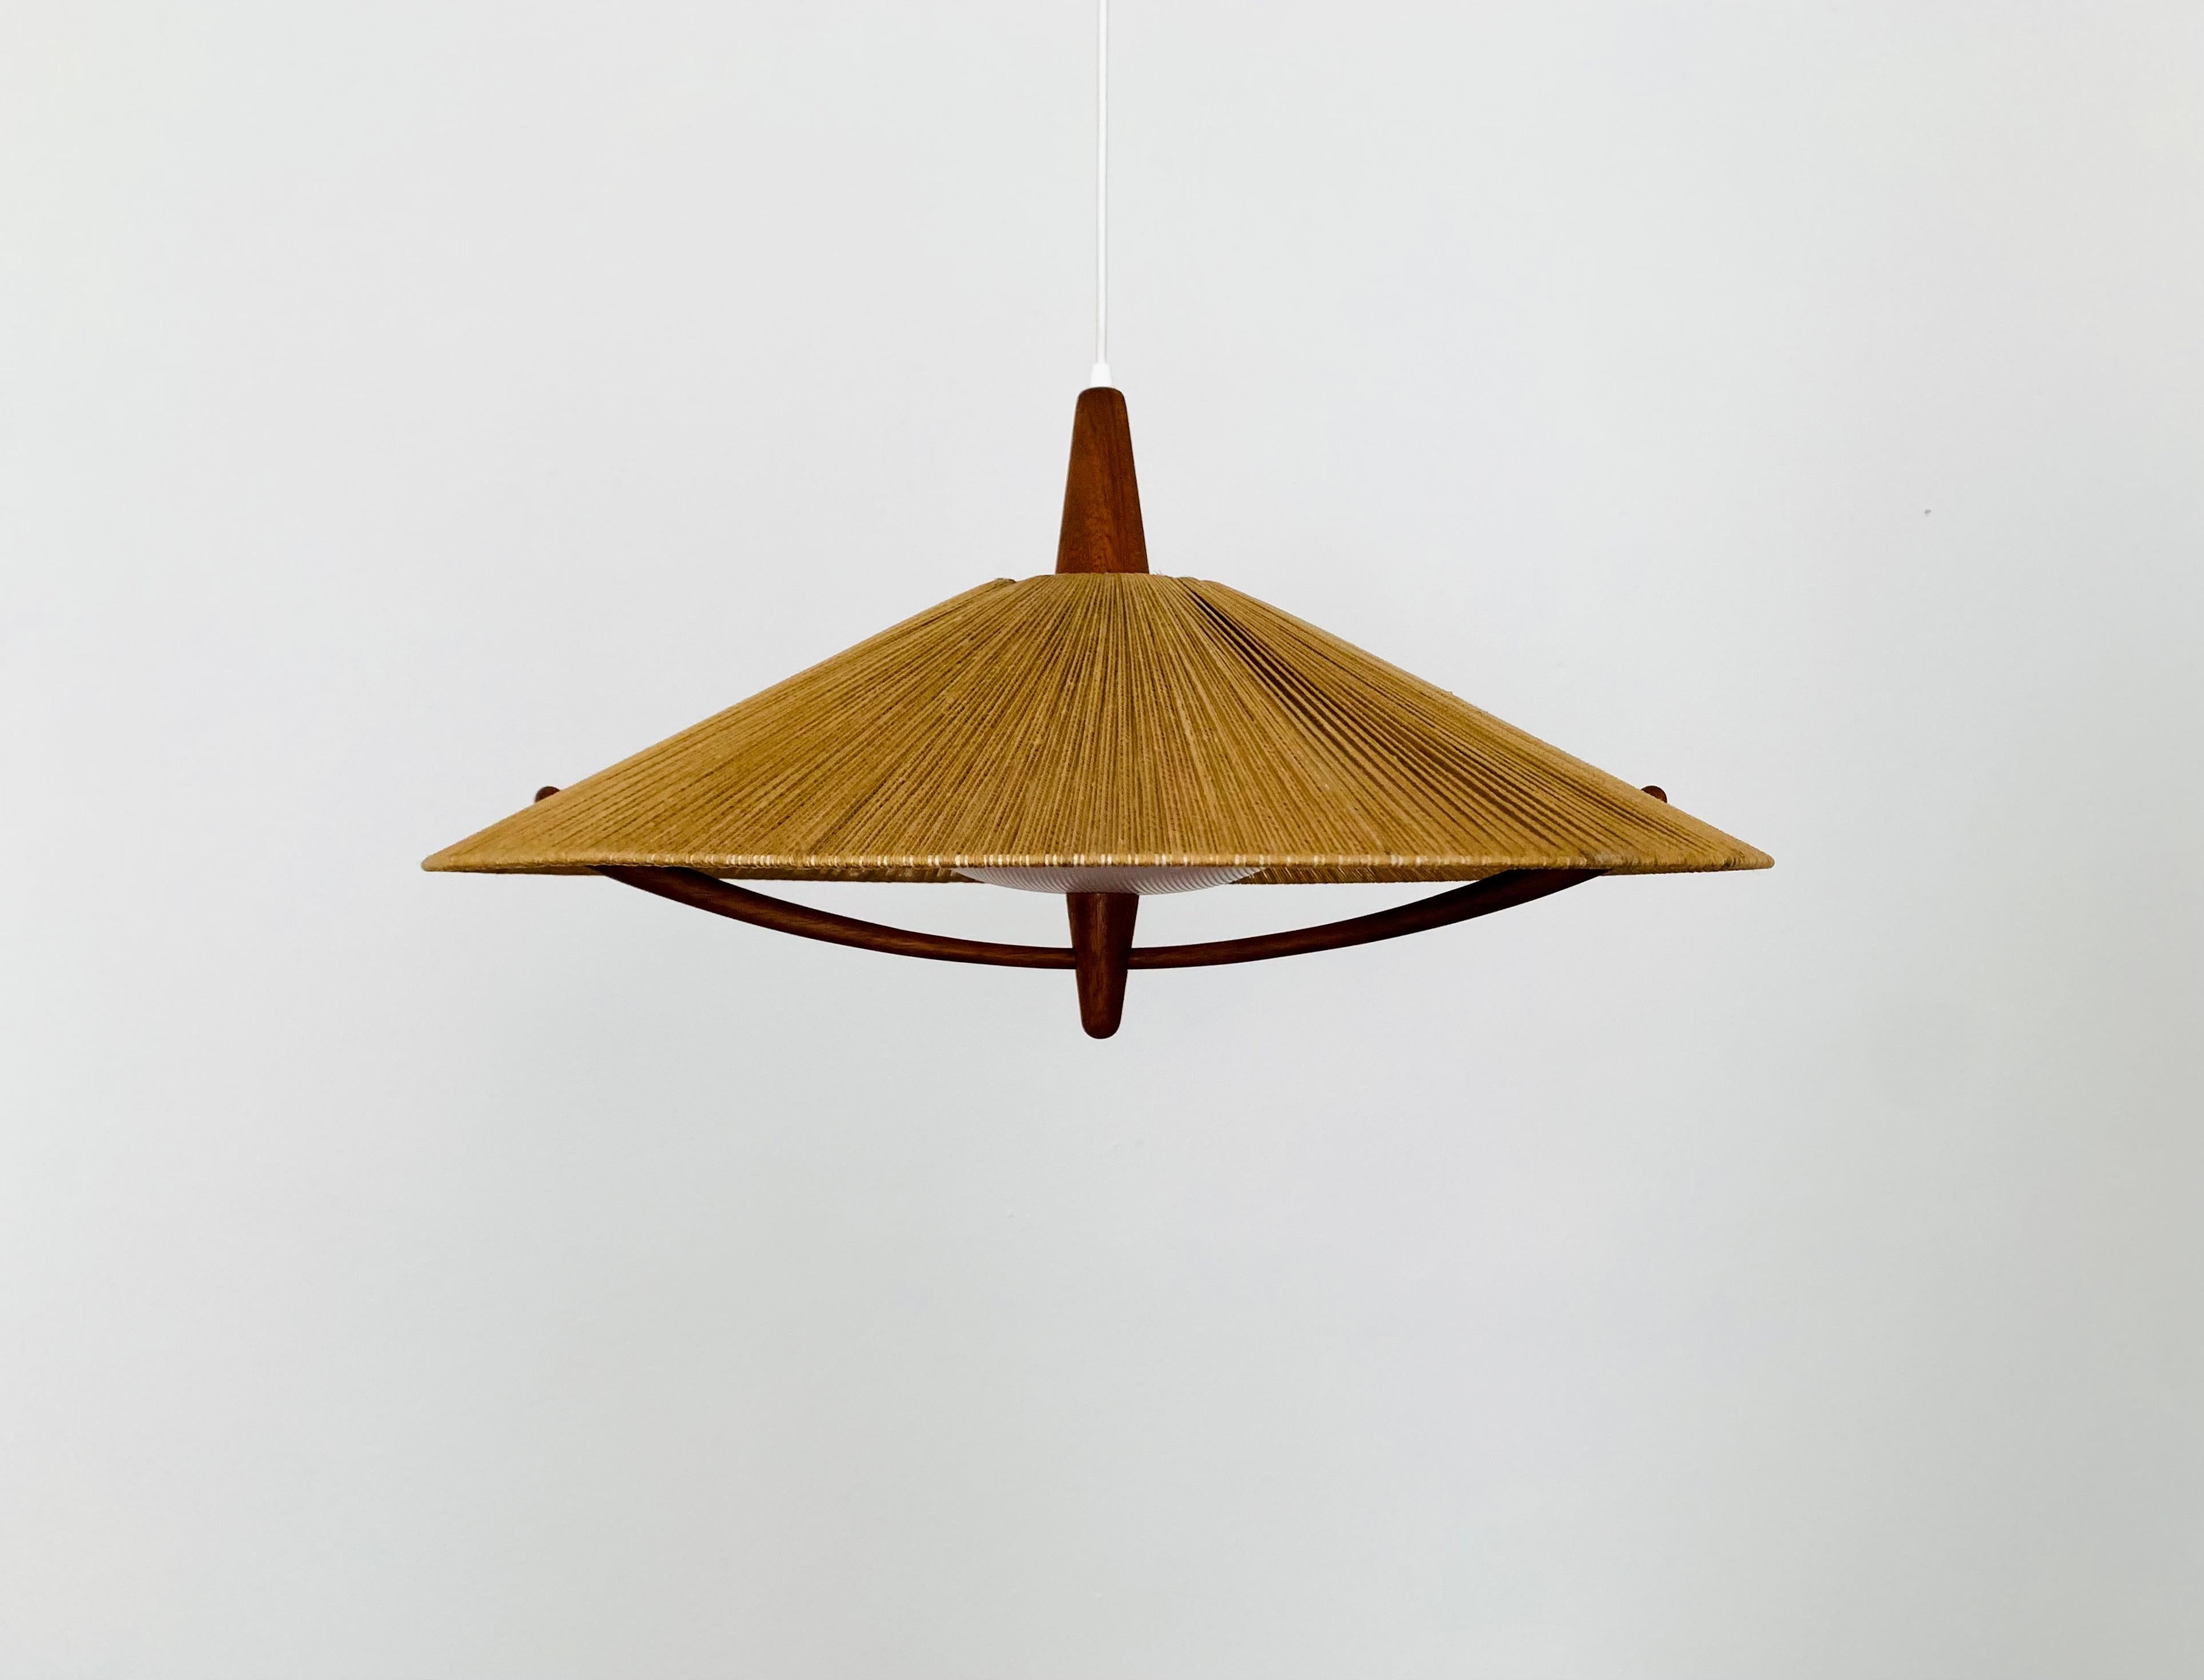 Exceptionally beautiful and very large pendant light from the 1960s.
The design is very unusual.
The shape and the materials create a warm and very pleasant light.
The teak details are beautifully shaped.

Condition:

Good vintage condition